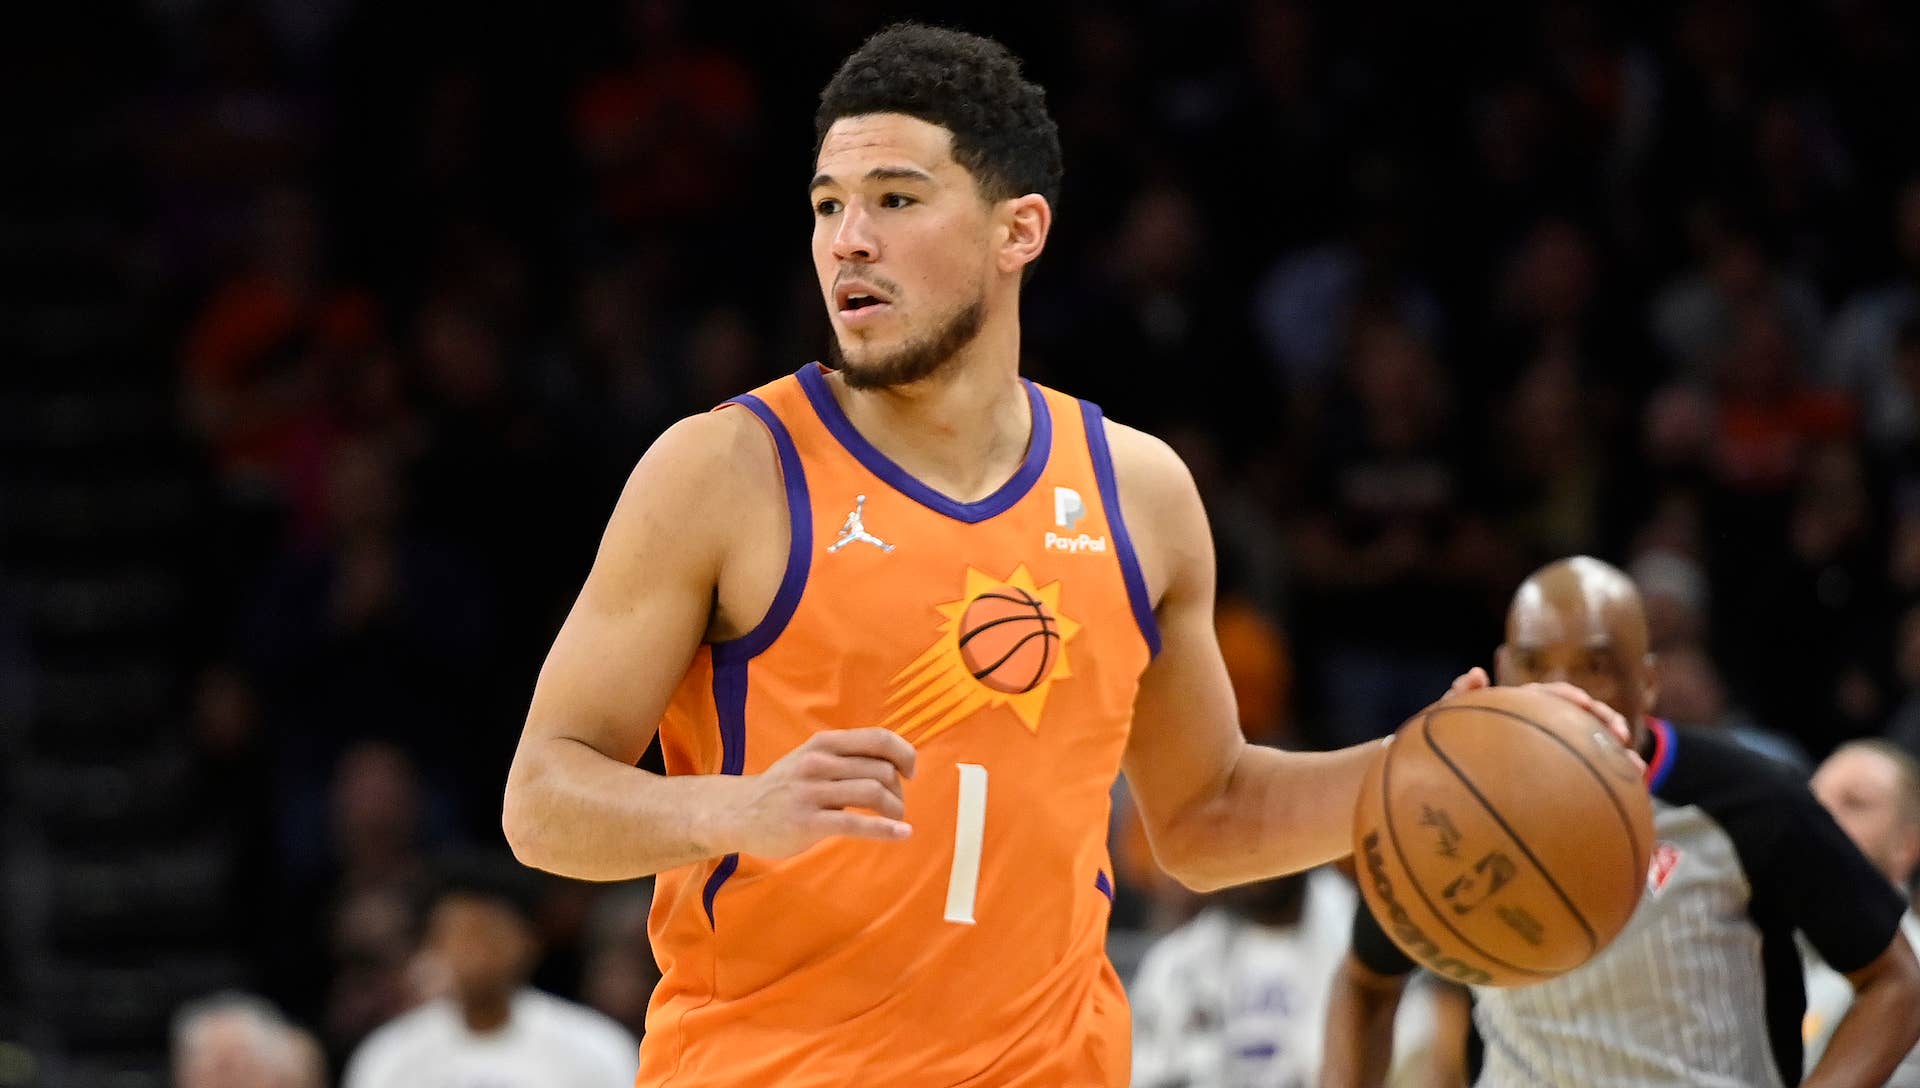 Devin Booker during the Suns game against the Lakers